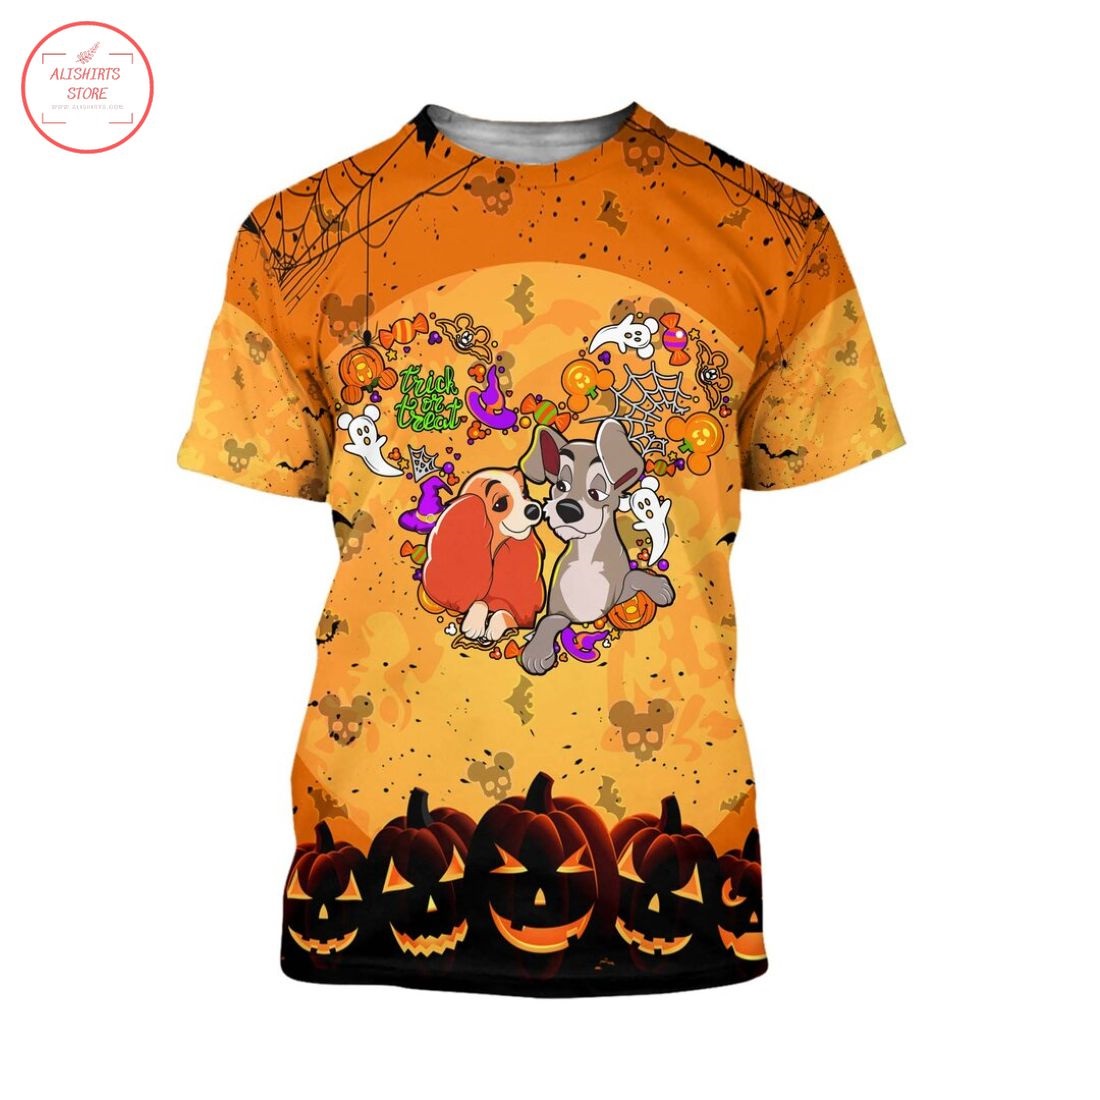 Lady and The Tramp Disney Halloween Shirt